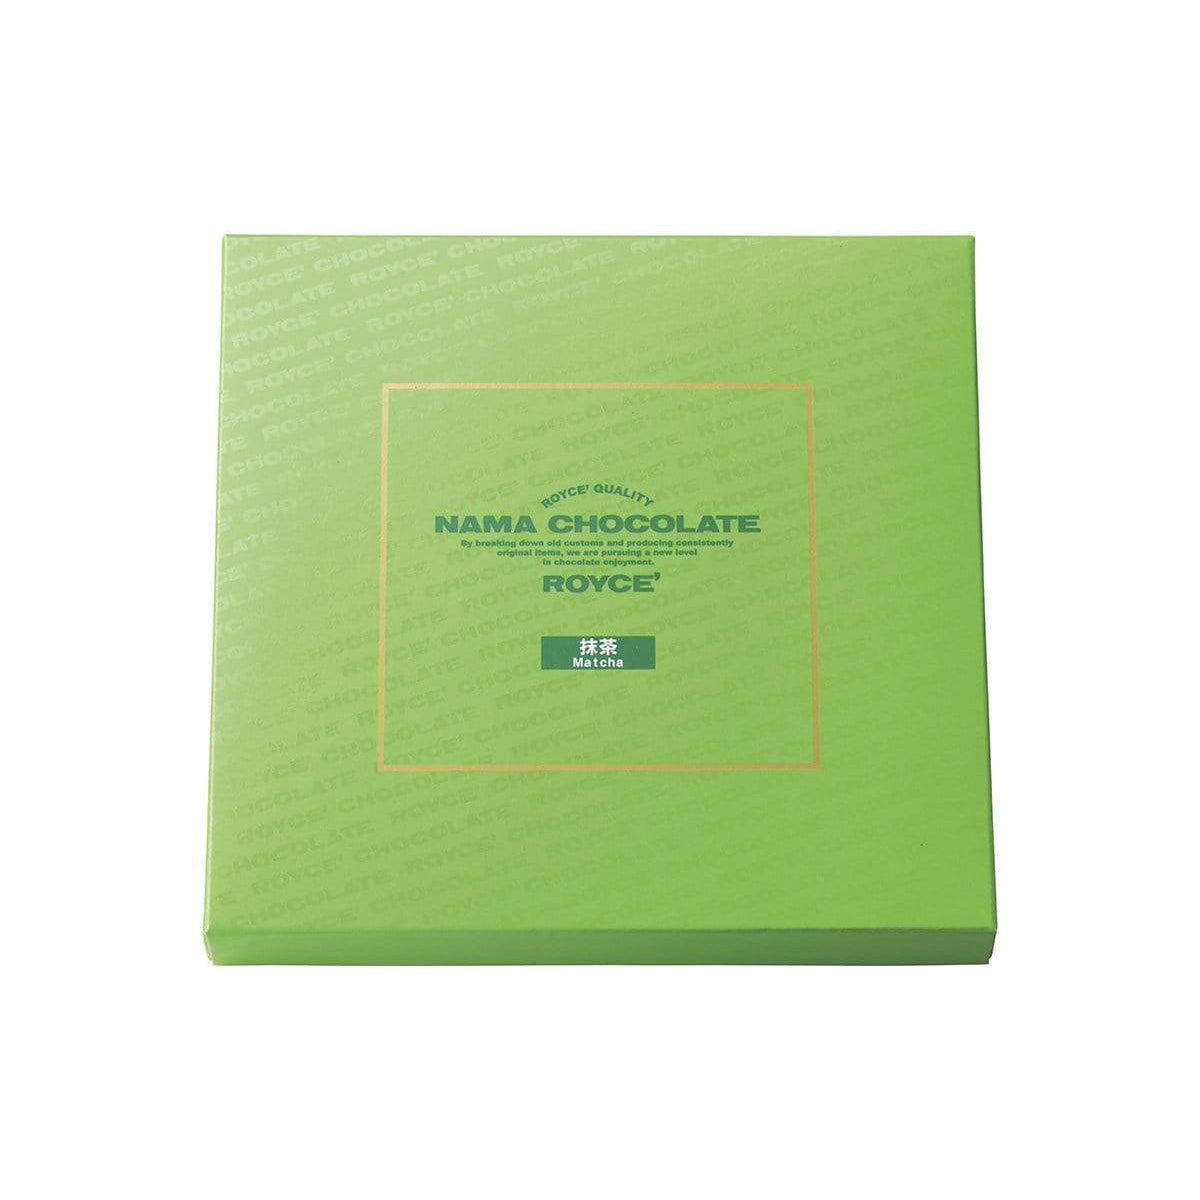 ROYCE' Chocolate - Nama Chocolate "Matcha" - Image shows a green box with green text inside golden square saying ROYCE' Quality Nama Chocolate By breaking down old customs and producing consistently original items, we are pursuing a new level in chocolate enjoyment. ROYCE' Matcha.